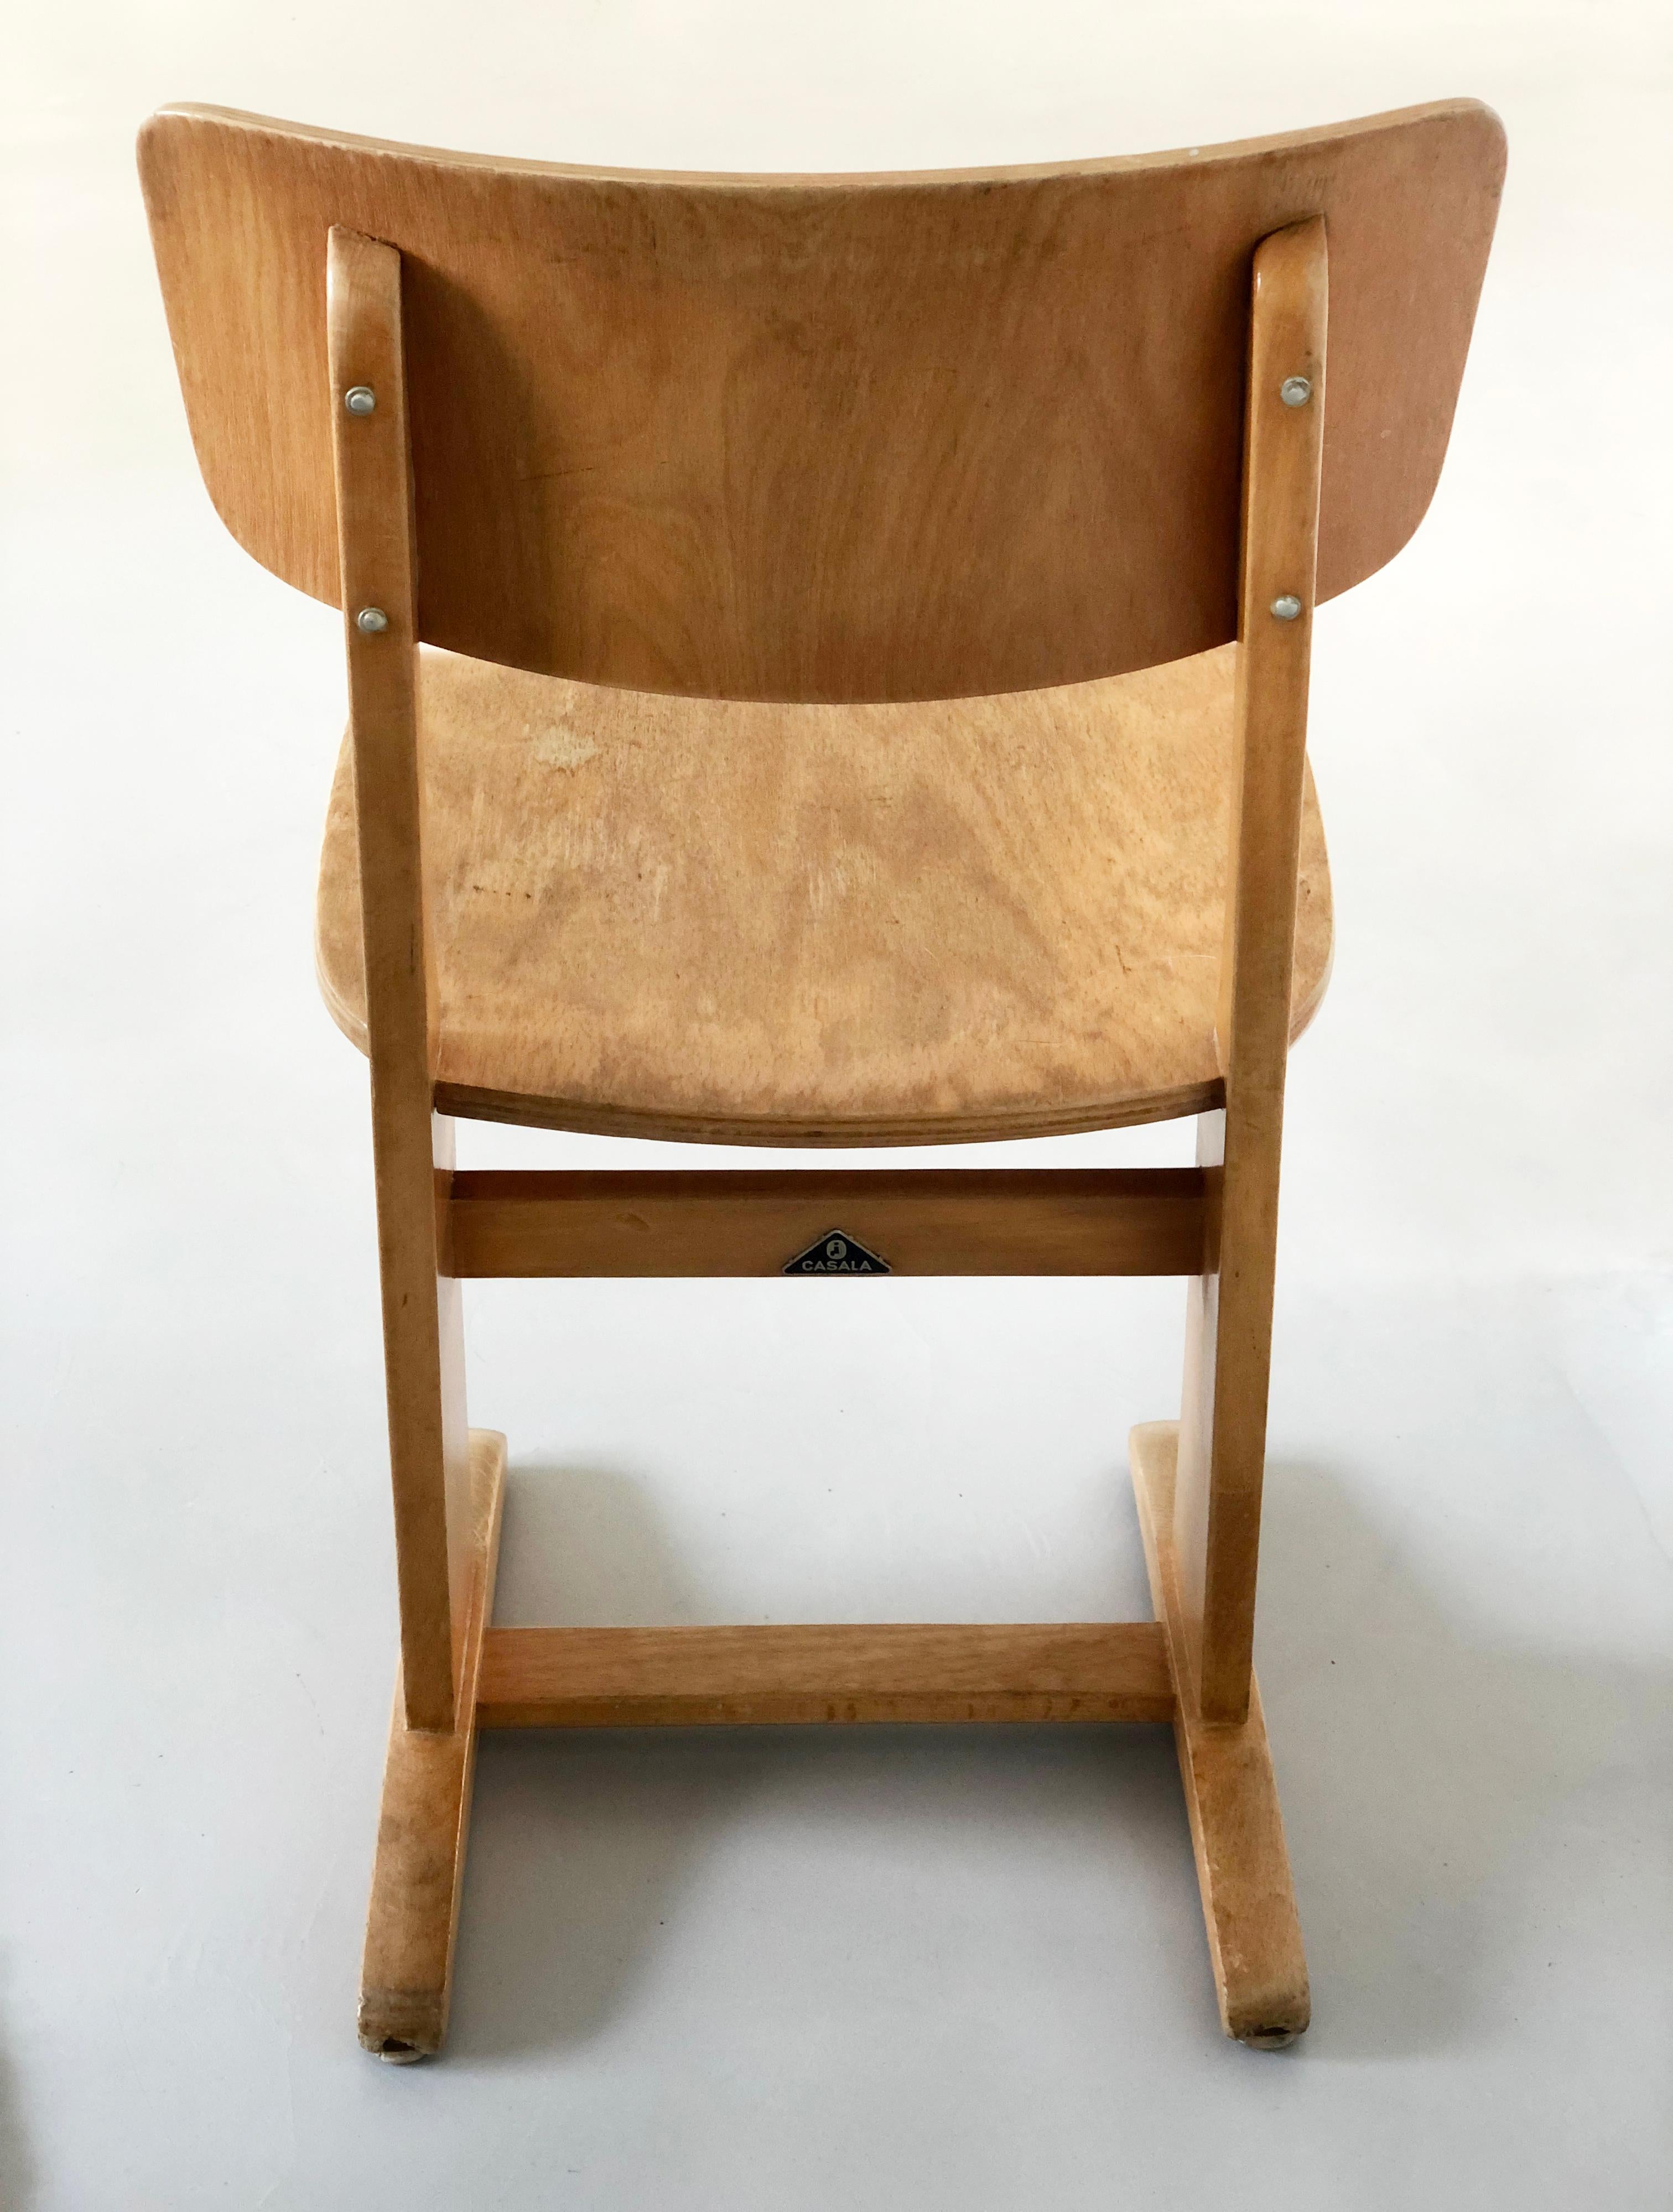 Mid-20th Century Children's School Chair by Karl Nothhelfer for Casala 1969 For Sale